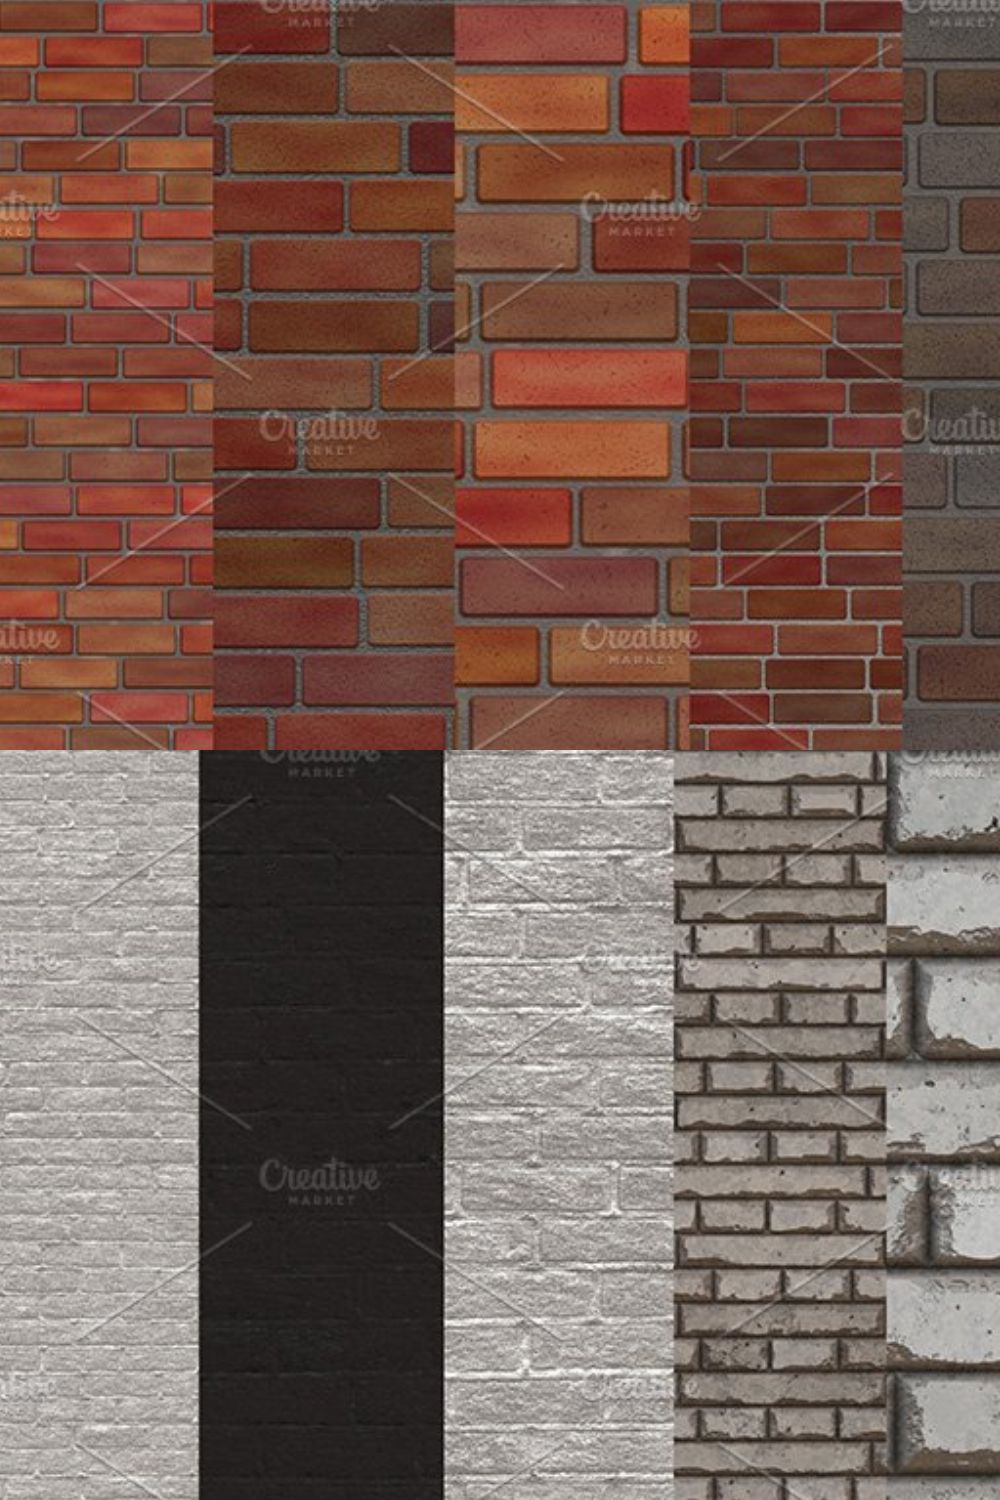 Brick wall textures 2 pinterest preview image.